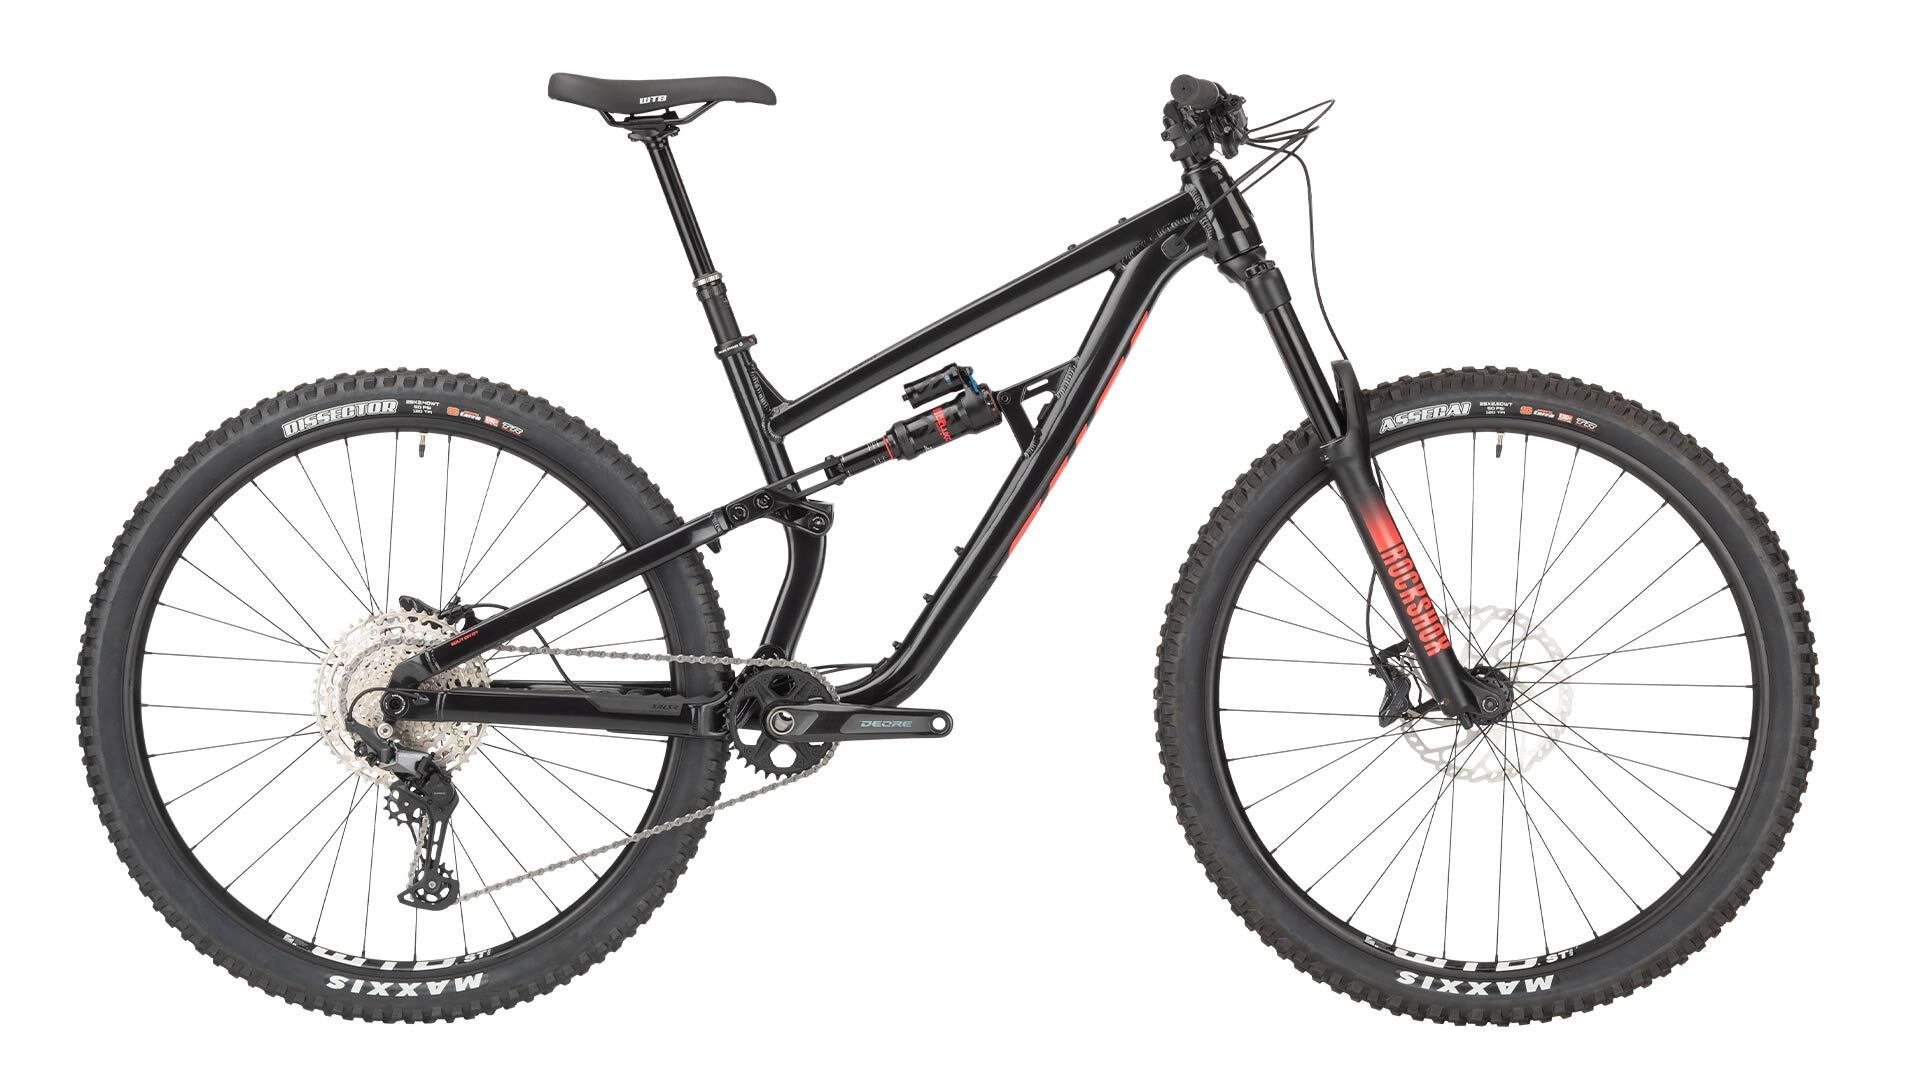 Salsa Blackthorn Deore 718 Cyclery